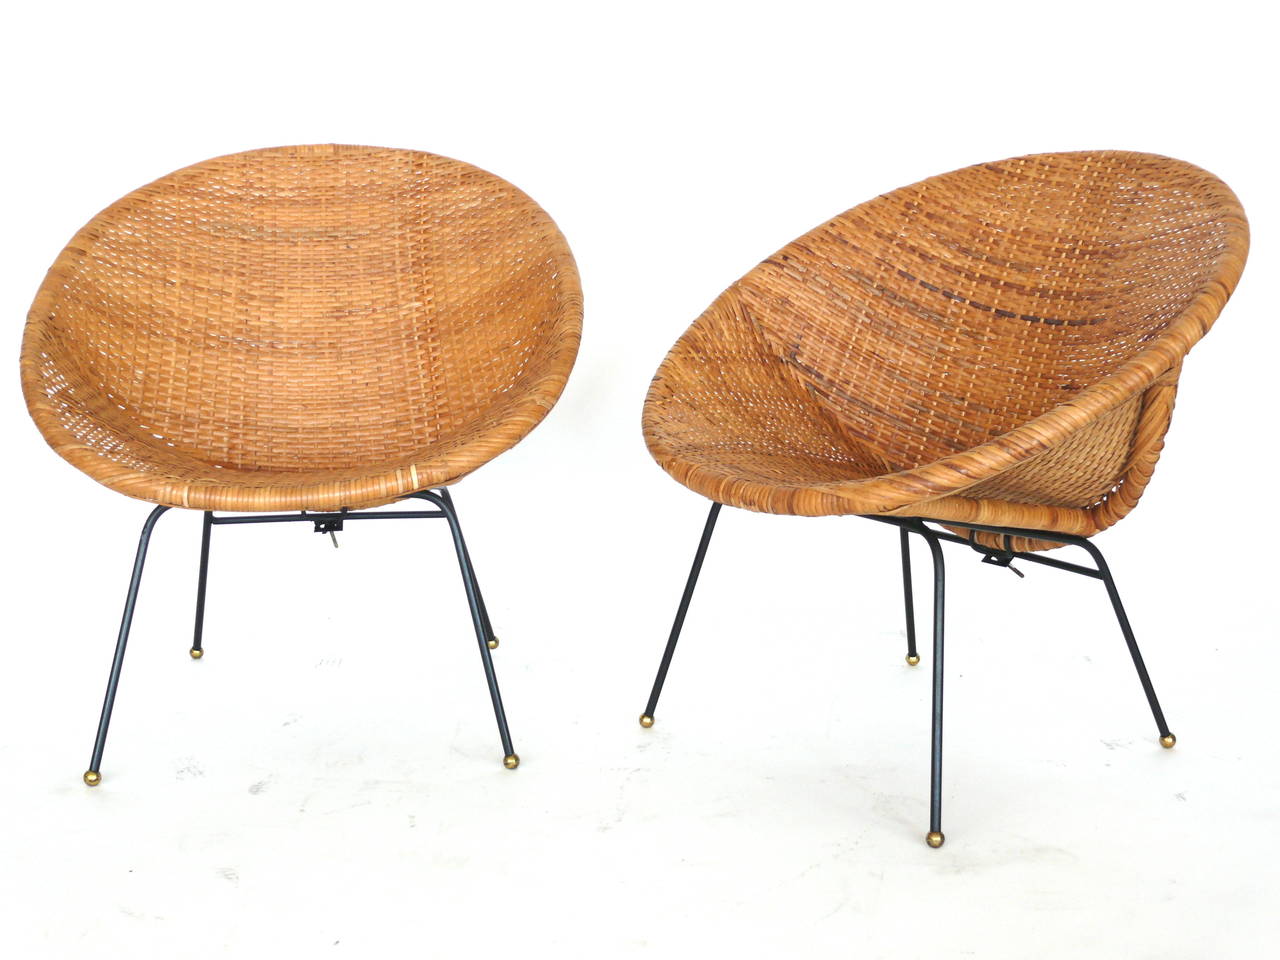 Handsome pair of of wicker and iron bucket chairs. Wicker in excellent condition. Iron legs have brass ball feet. Perfect for the home or covered outdoor patio.